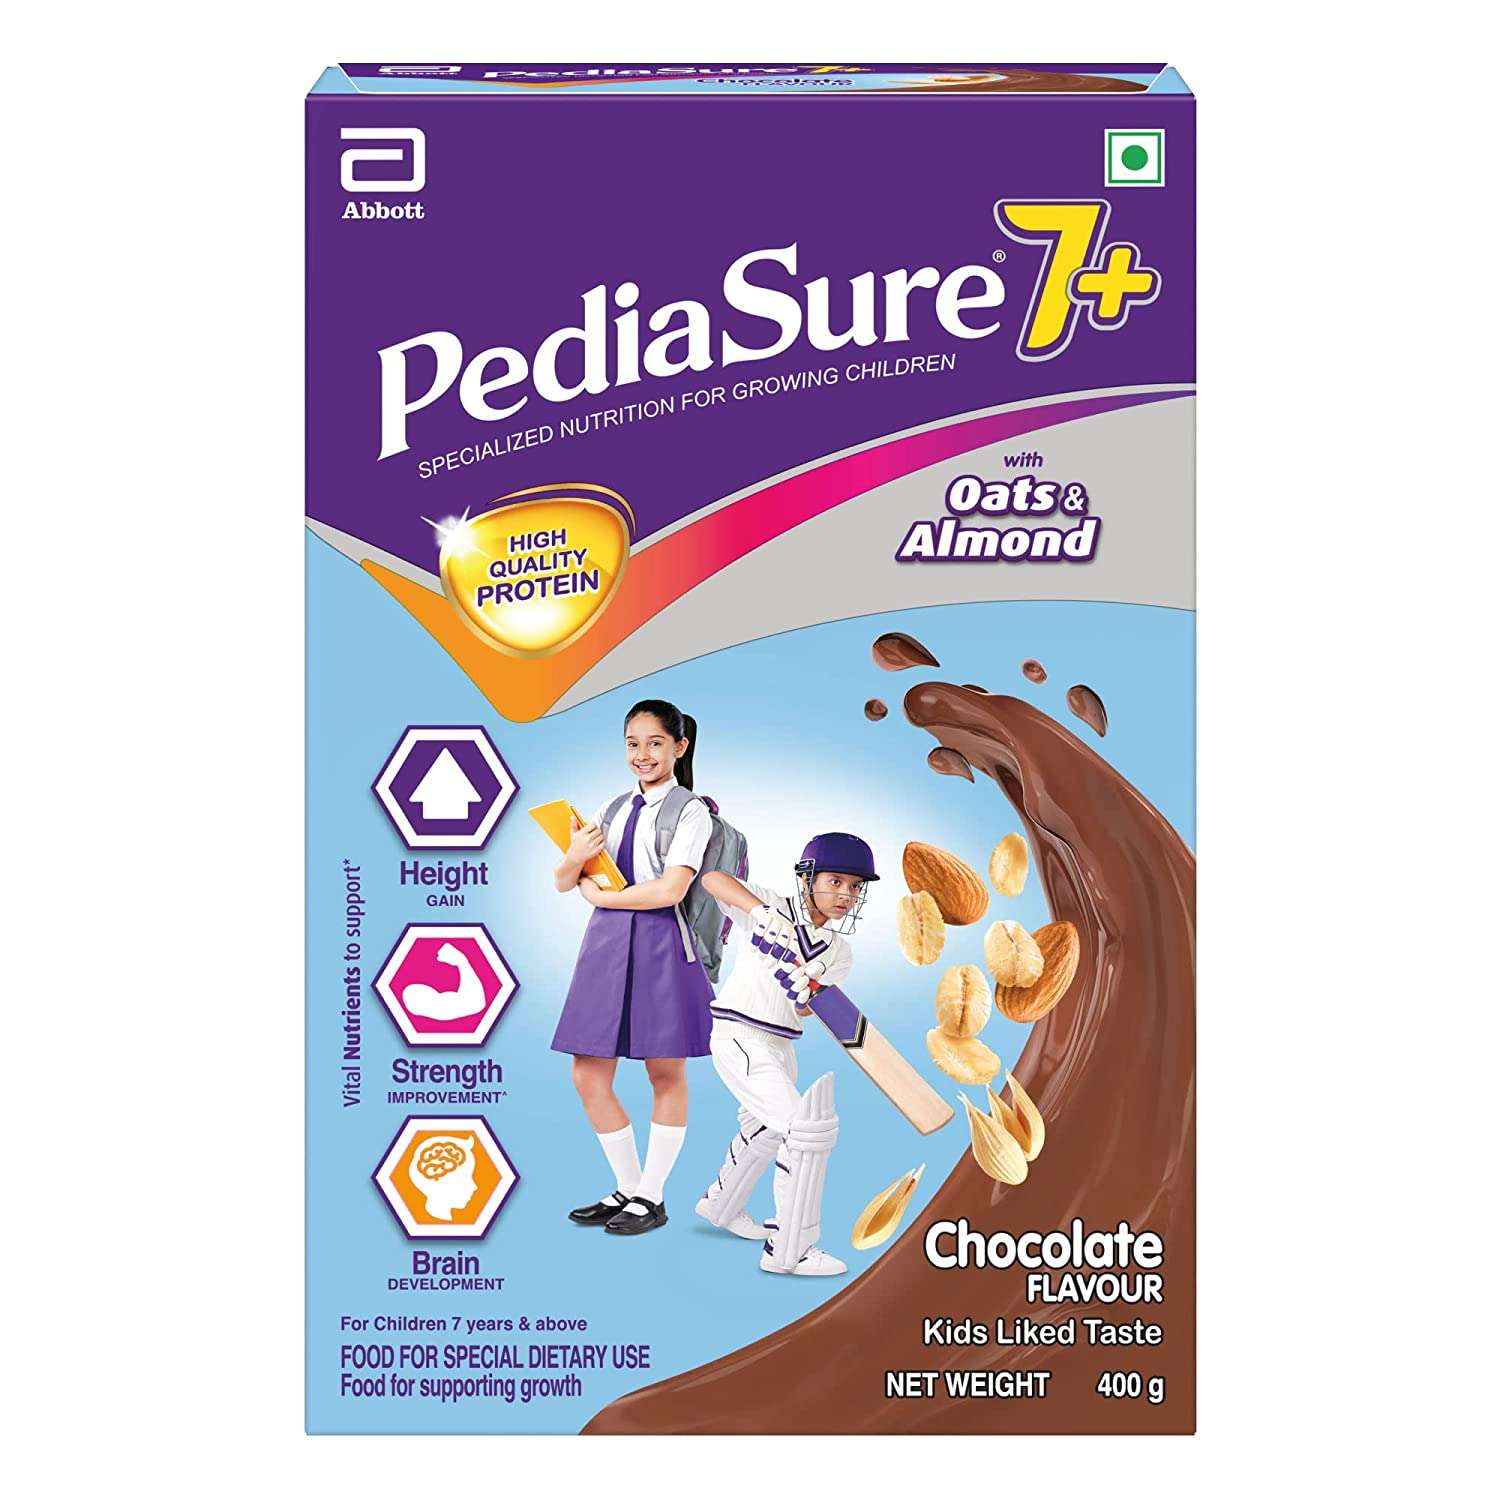 Pediasure 7+ Specialized Nutrition Drink Powder 400g, Premium Chocolate  Flavour, Complete & Balanced Nutrition for Growing Children,Supports Height  Gain,Muscle Strength & Brain Development-Refill Pack - Punctual Kart